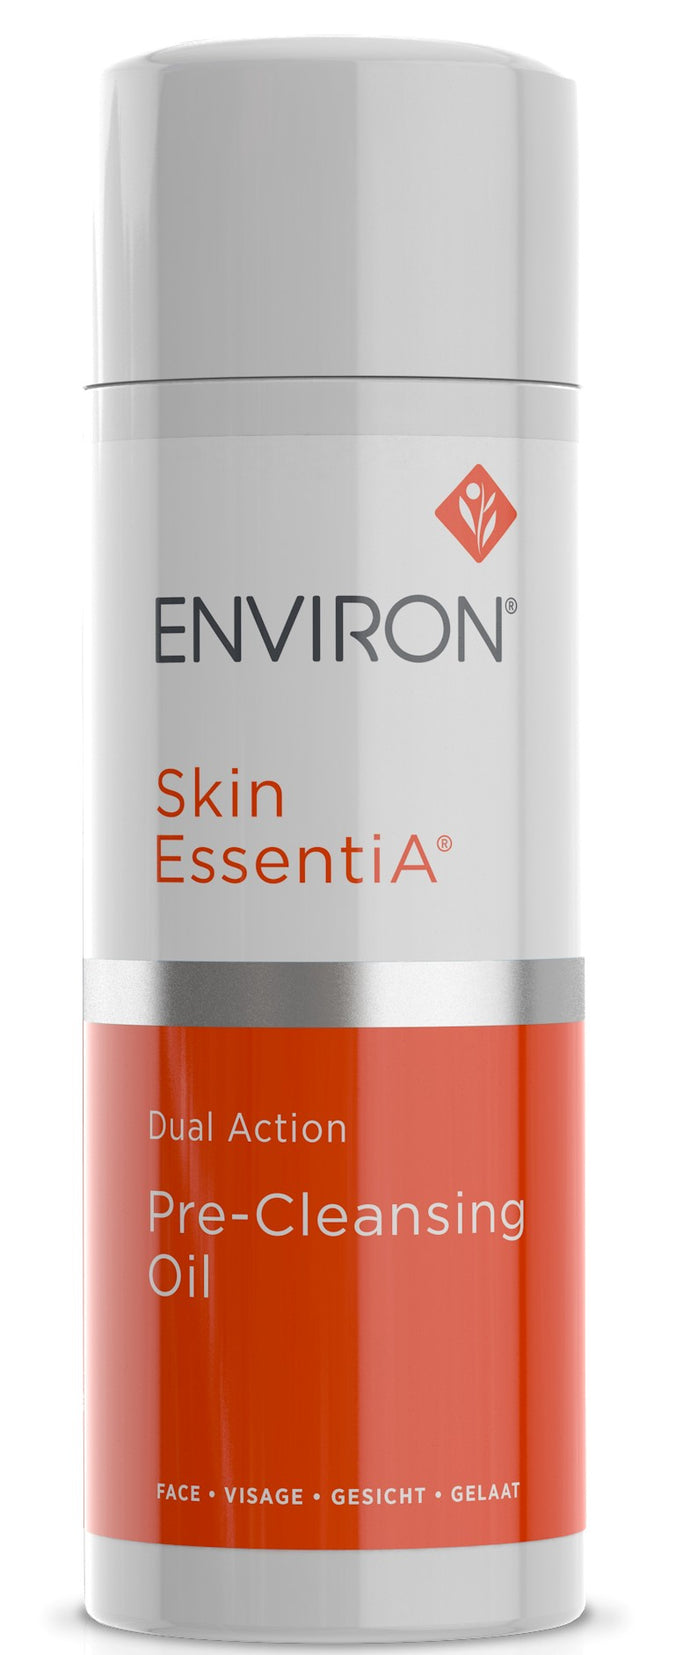 Dual Action Pre-Cleansing Oil